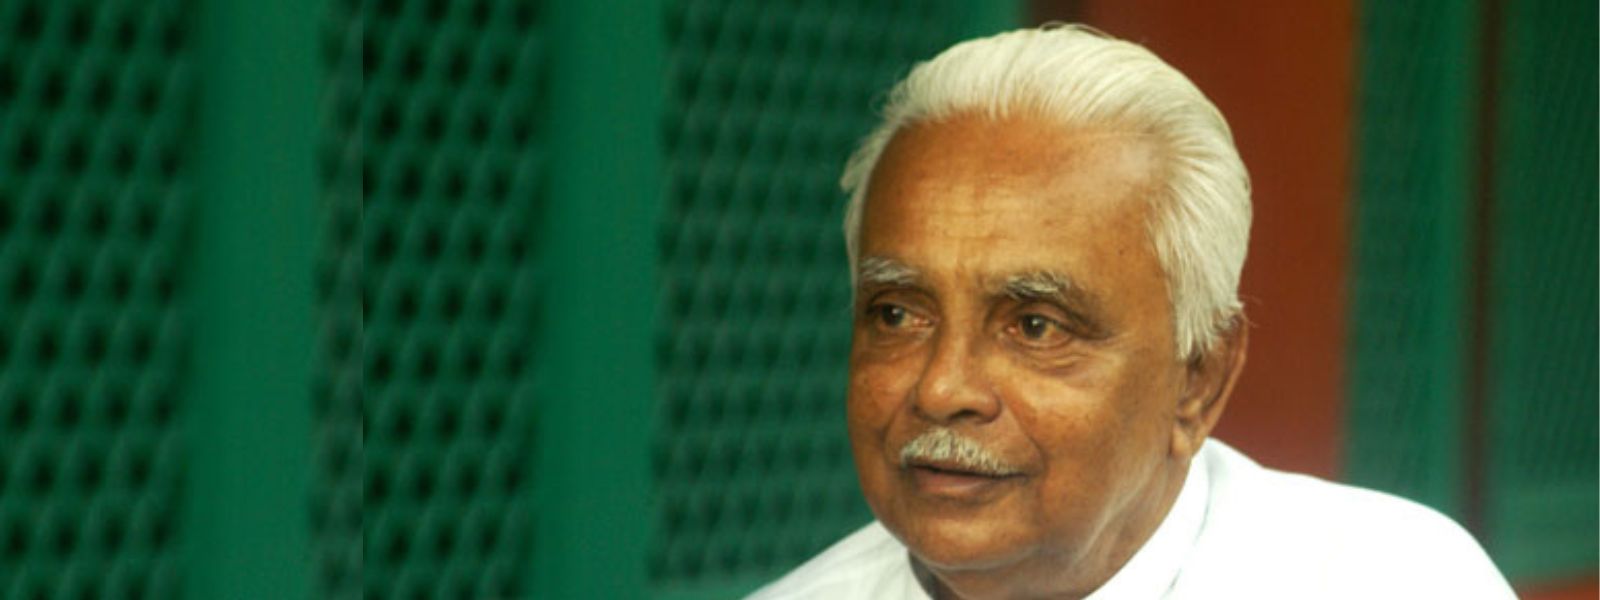 Dr. Ariyaratne's final rites with state honours